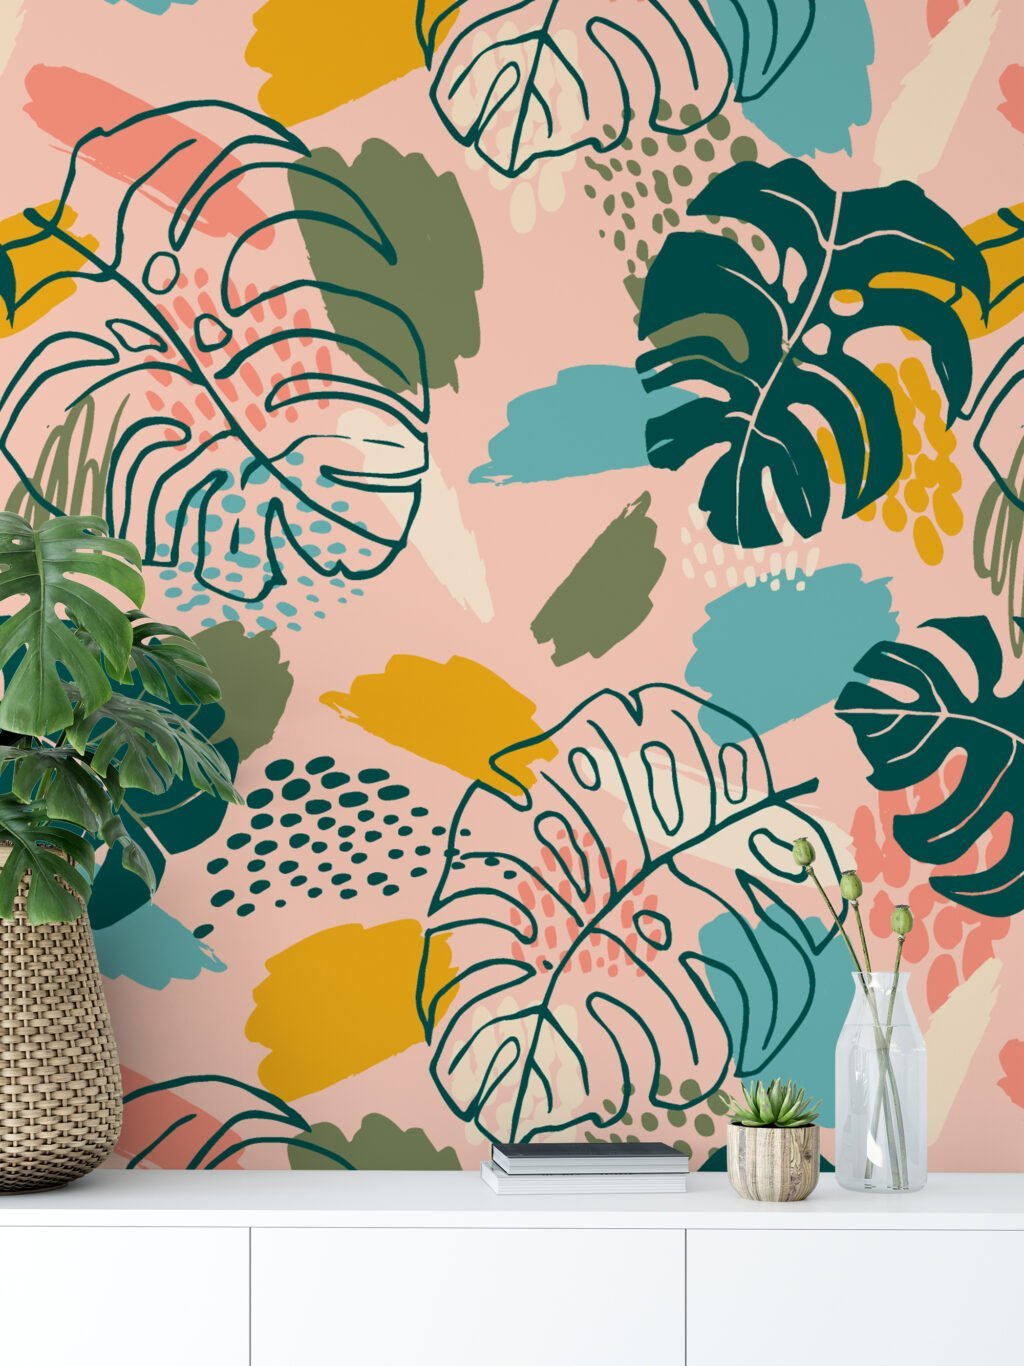 Abstract Flat And Line Art Monstera Leaves Design Illustration Wallpaper, Tropical Leaf Design Peel & Stick Wall Mural